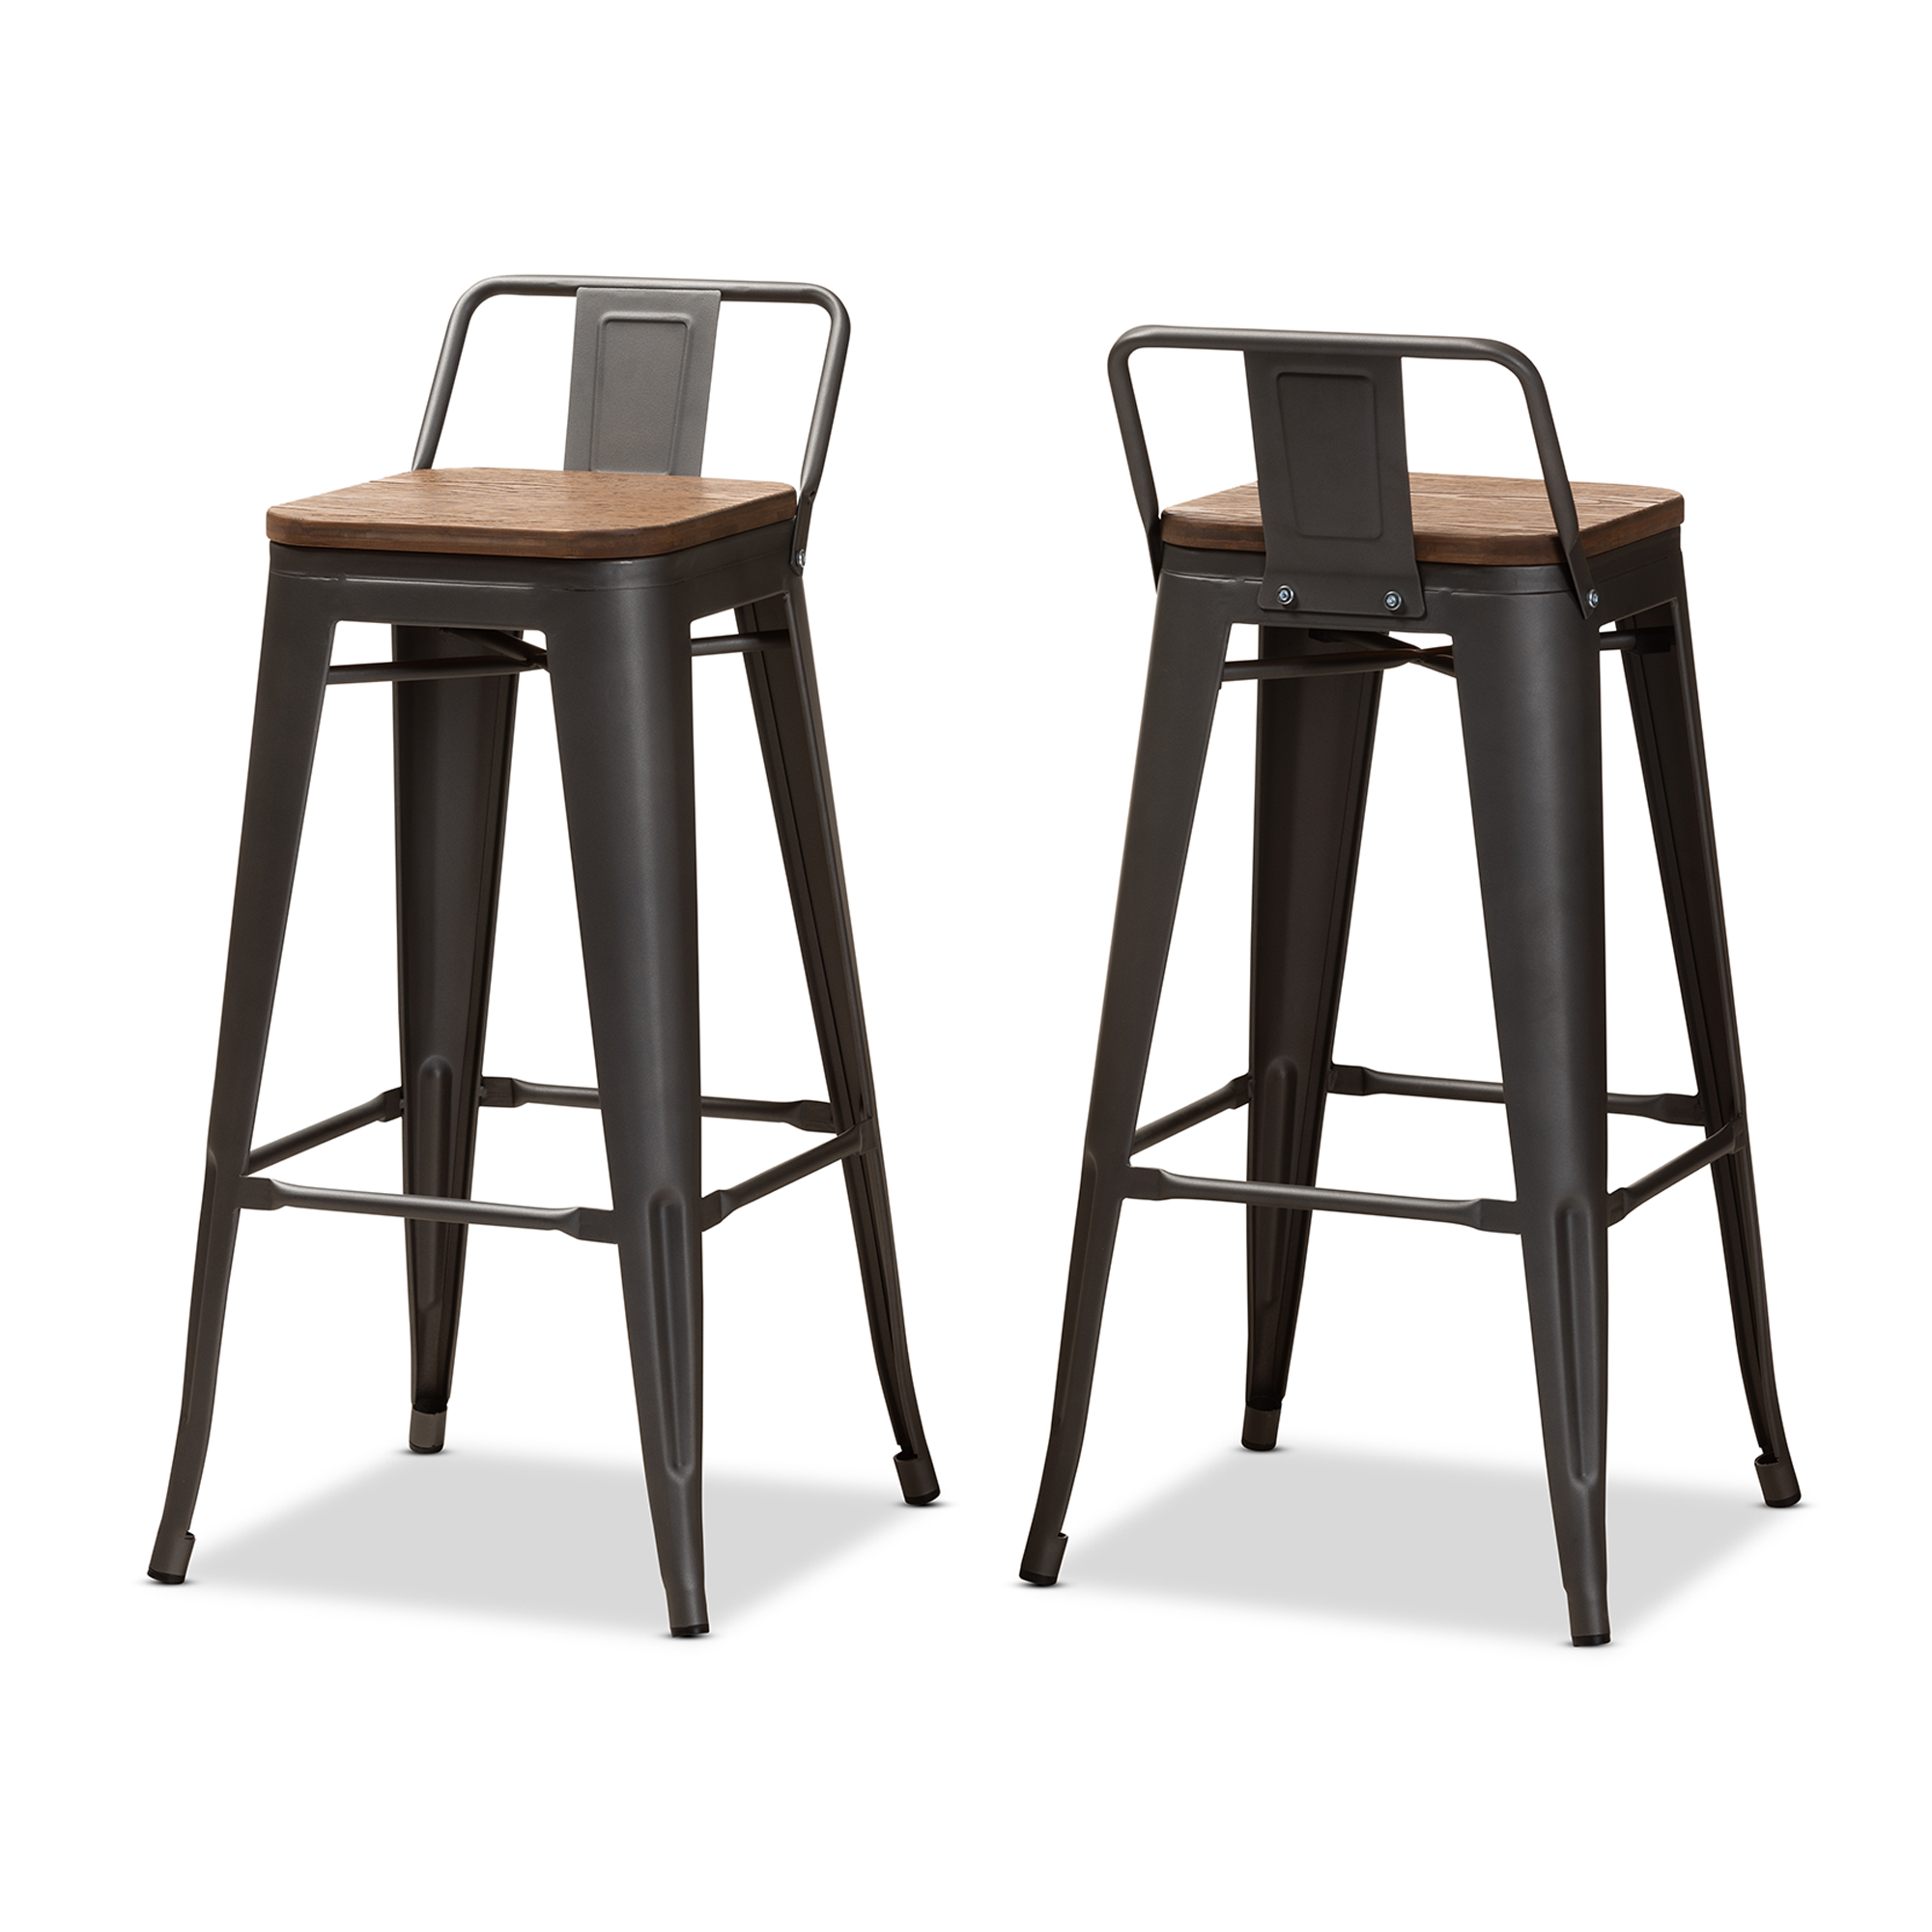 Baxton Studio Henri Vintage Rustic Industrial Style Tolix-Inspired Bamboo and Gun Metal-Finished Steel Stackable Bar Stool with Backrest Set of 2